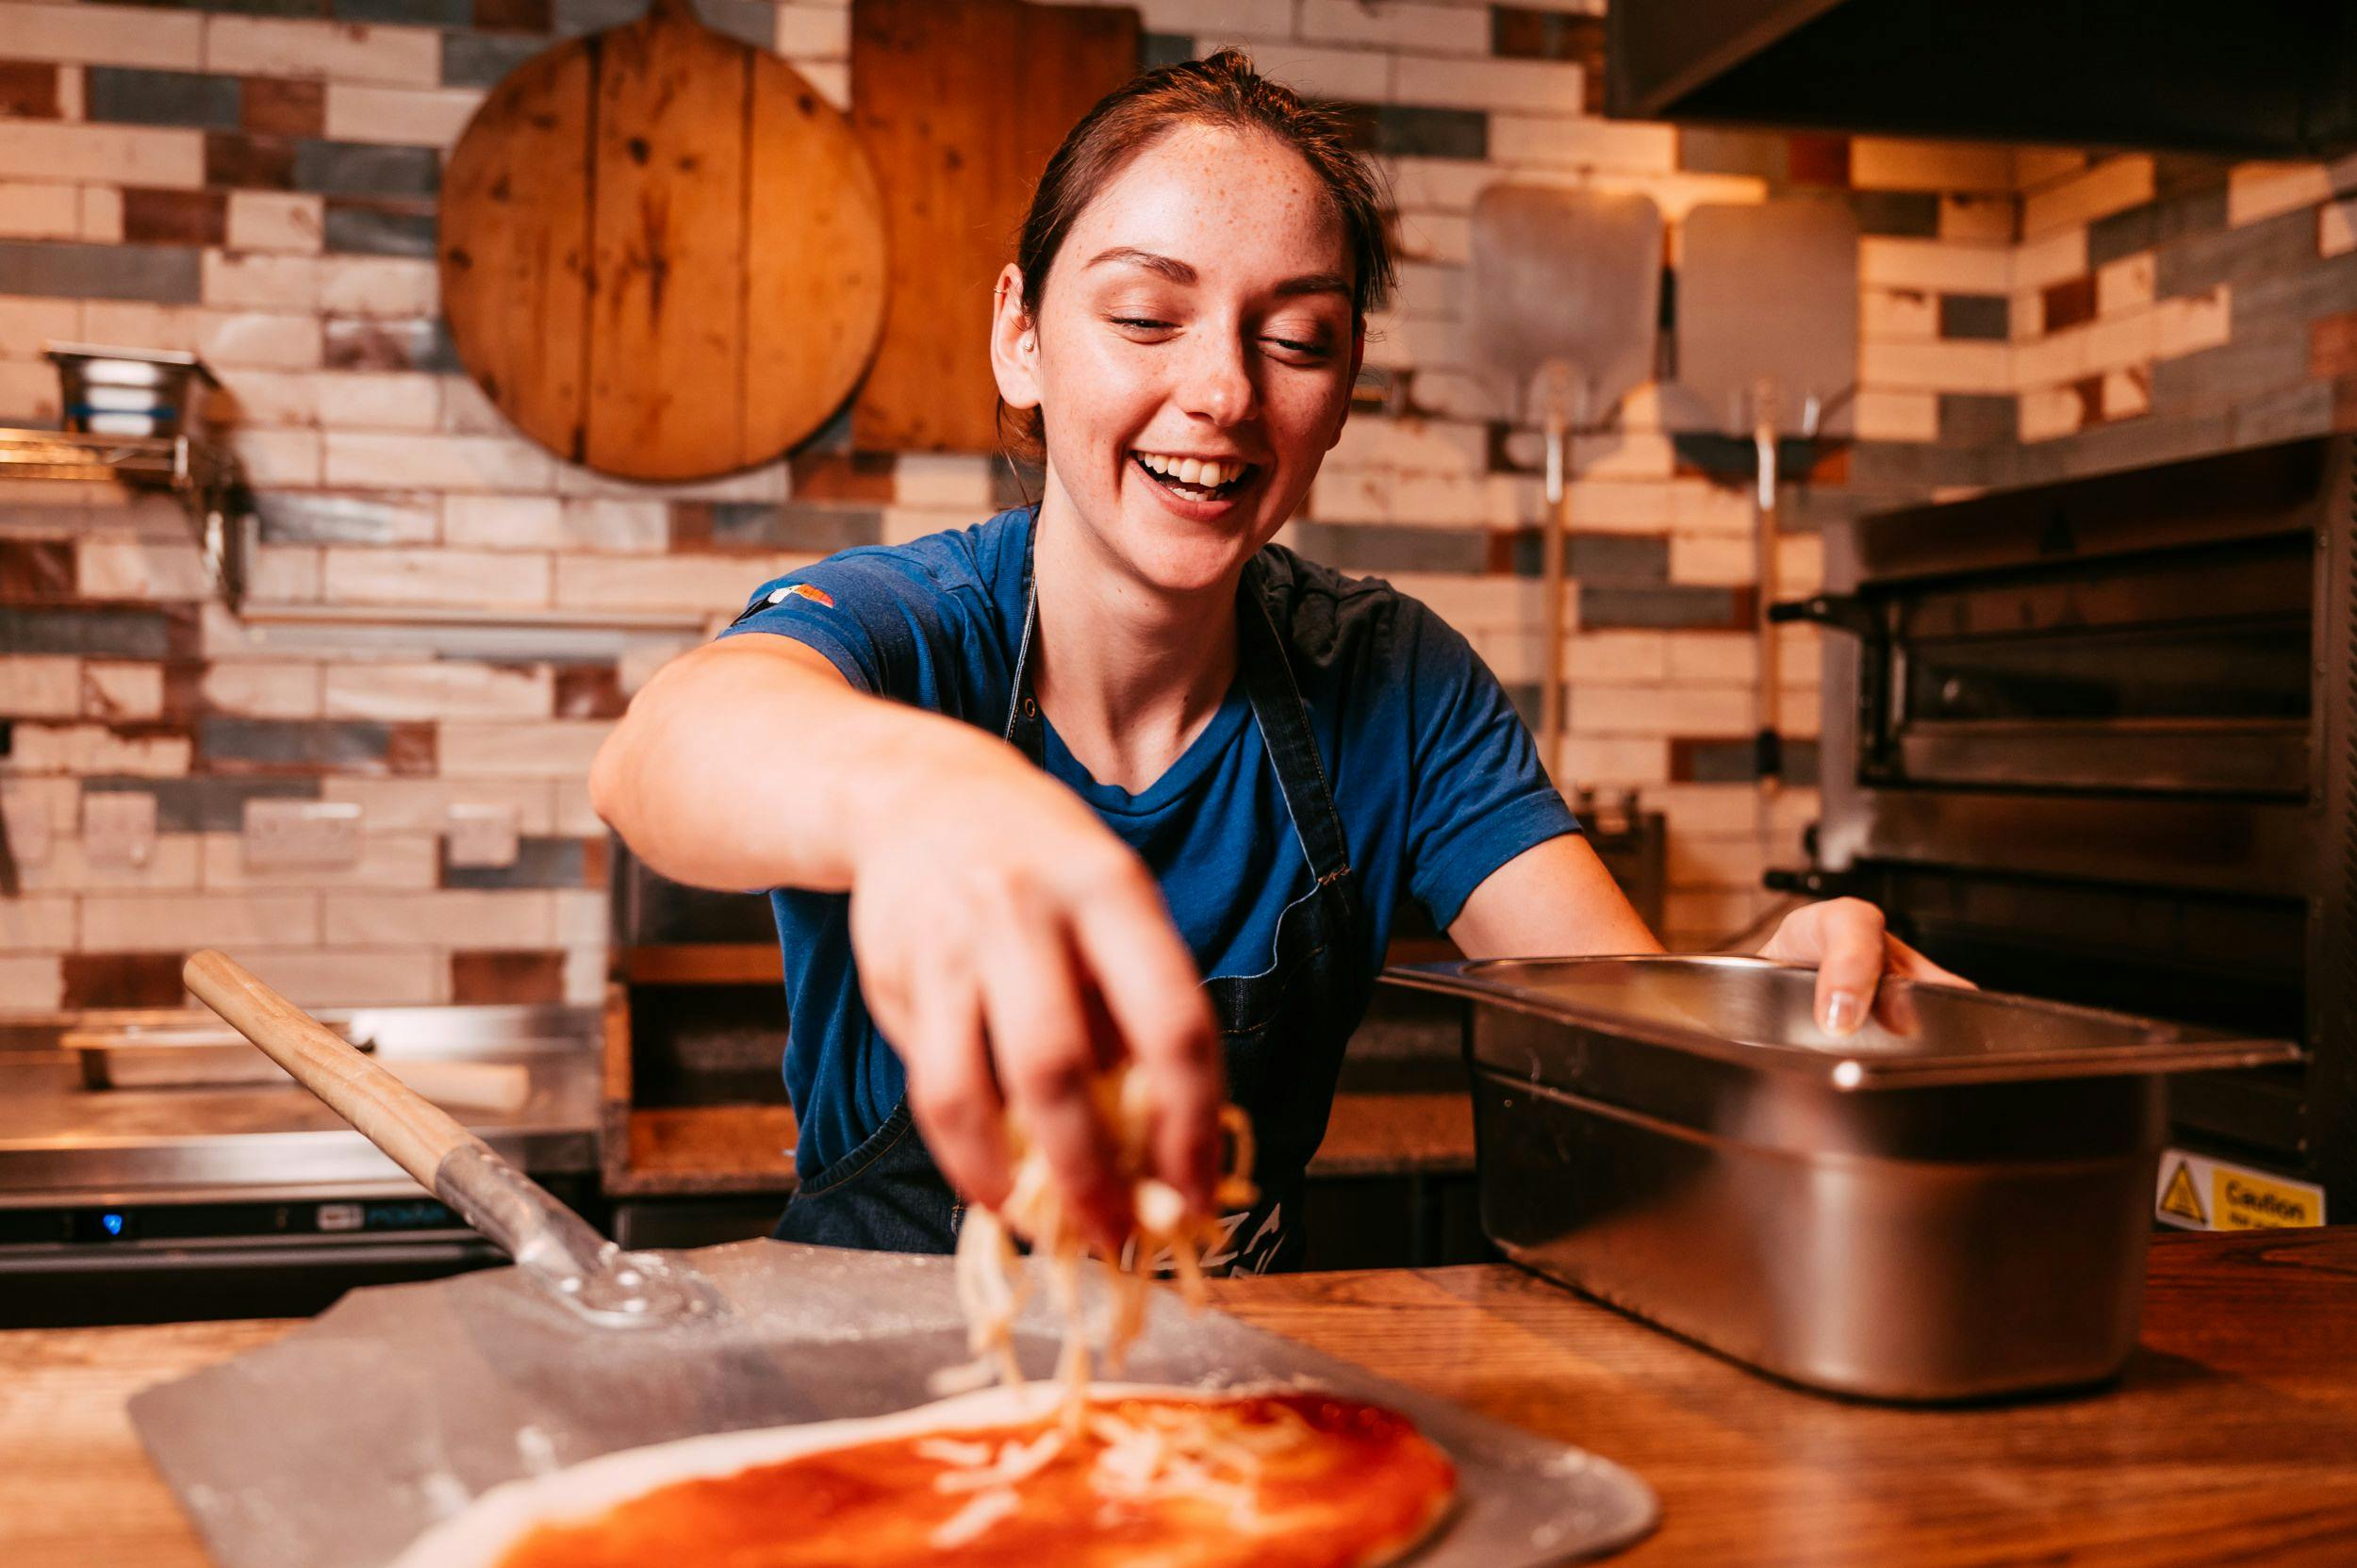 Girl with her hair tied back and a blue t-shirt sprinkling cheese over a raw pizza base while smiling. 